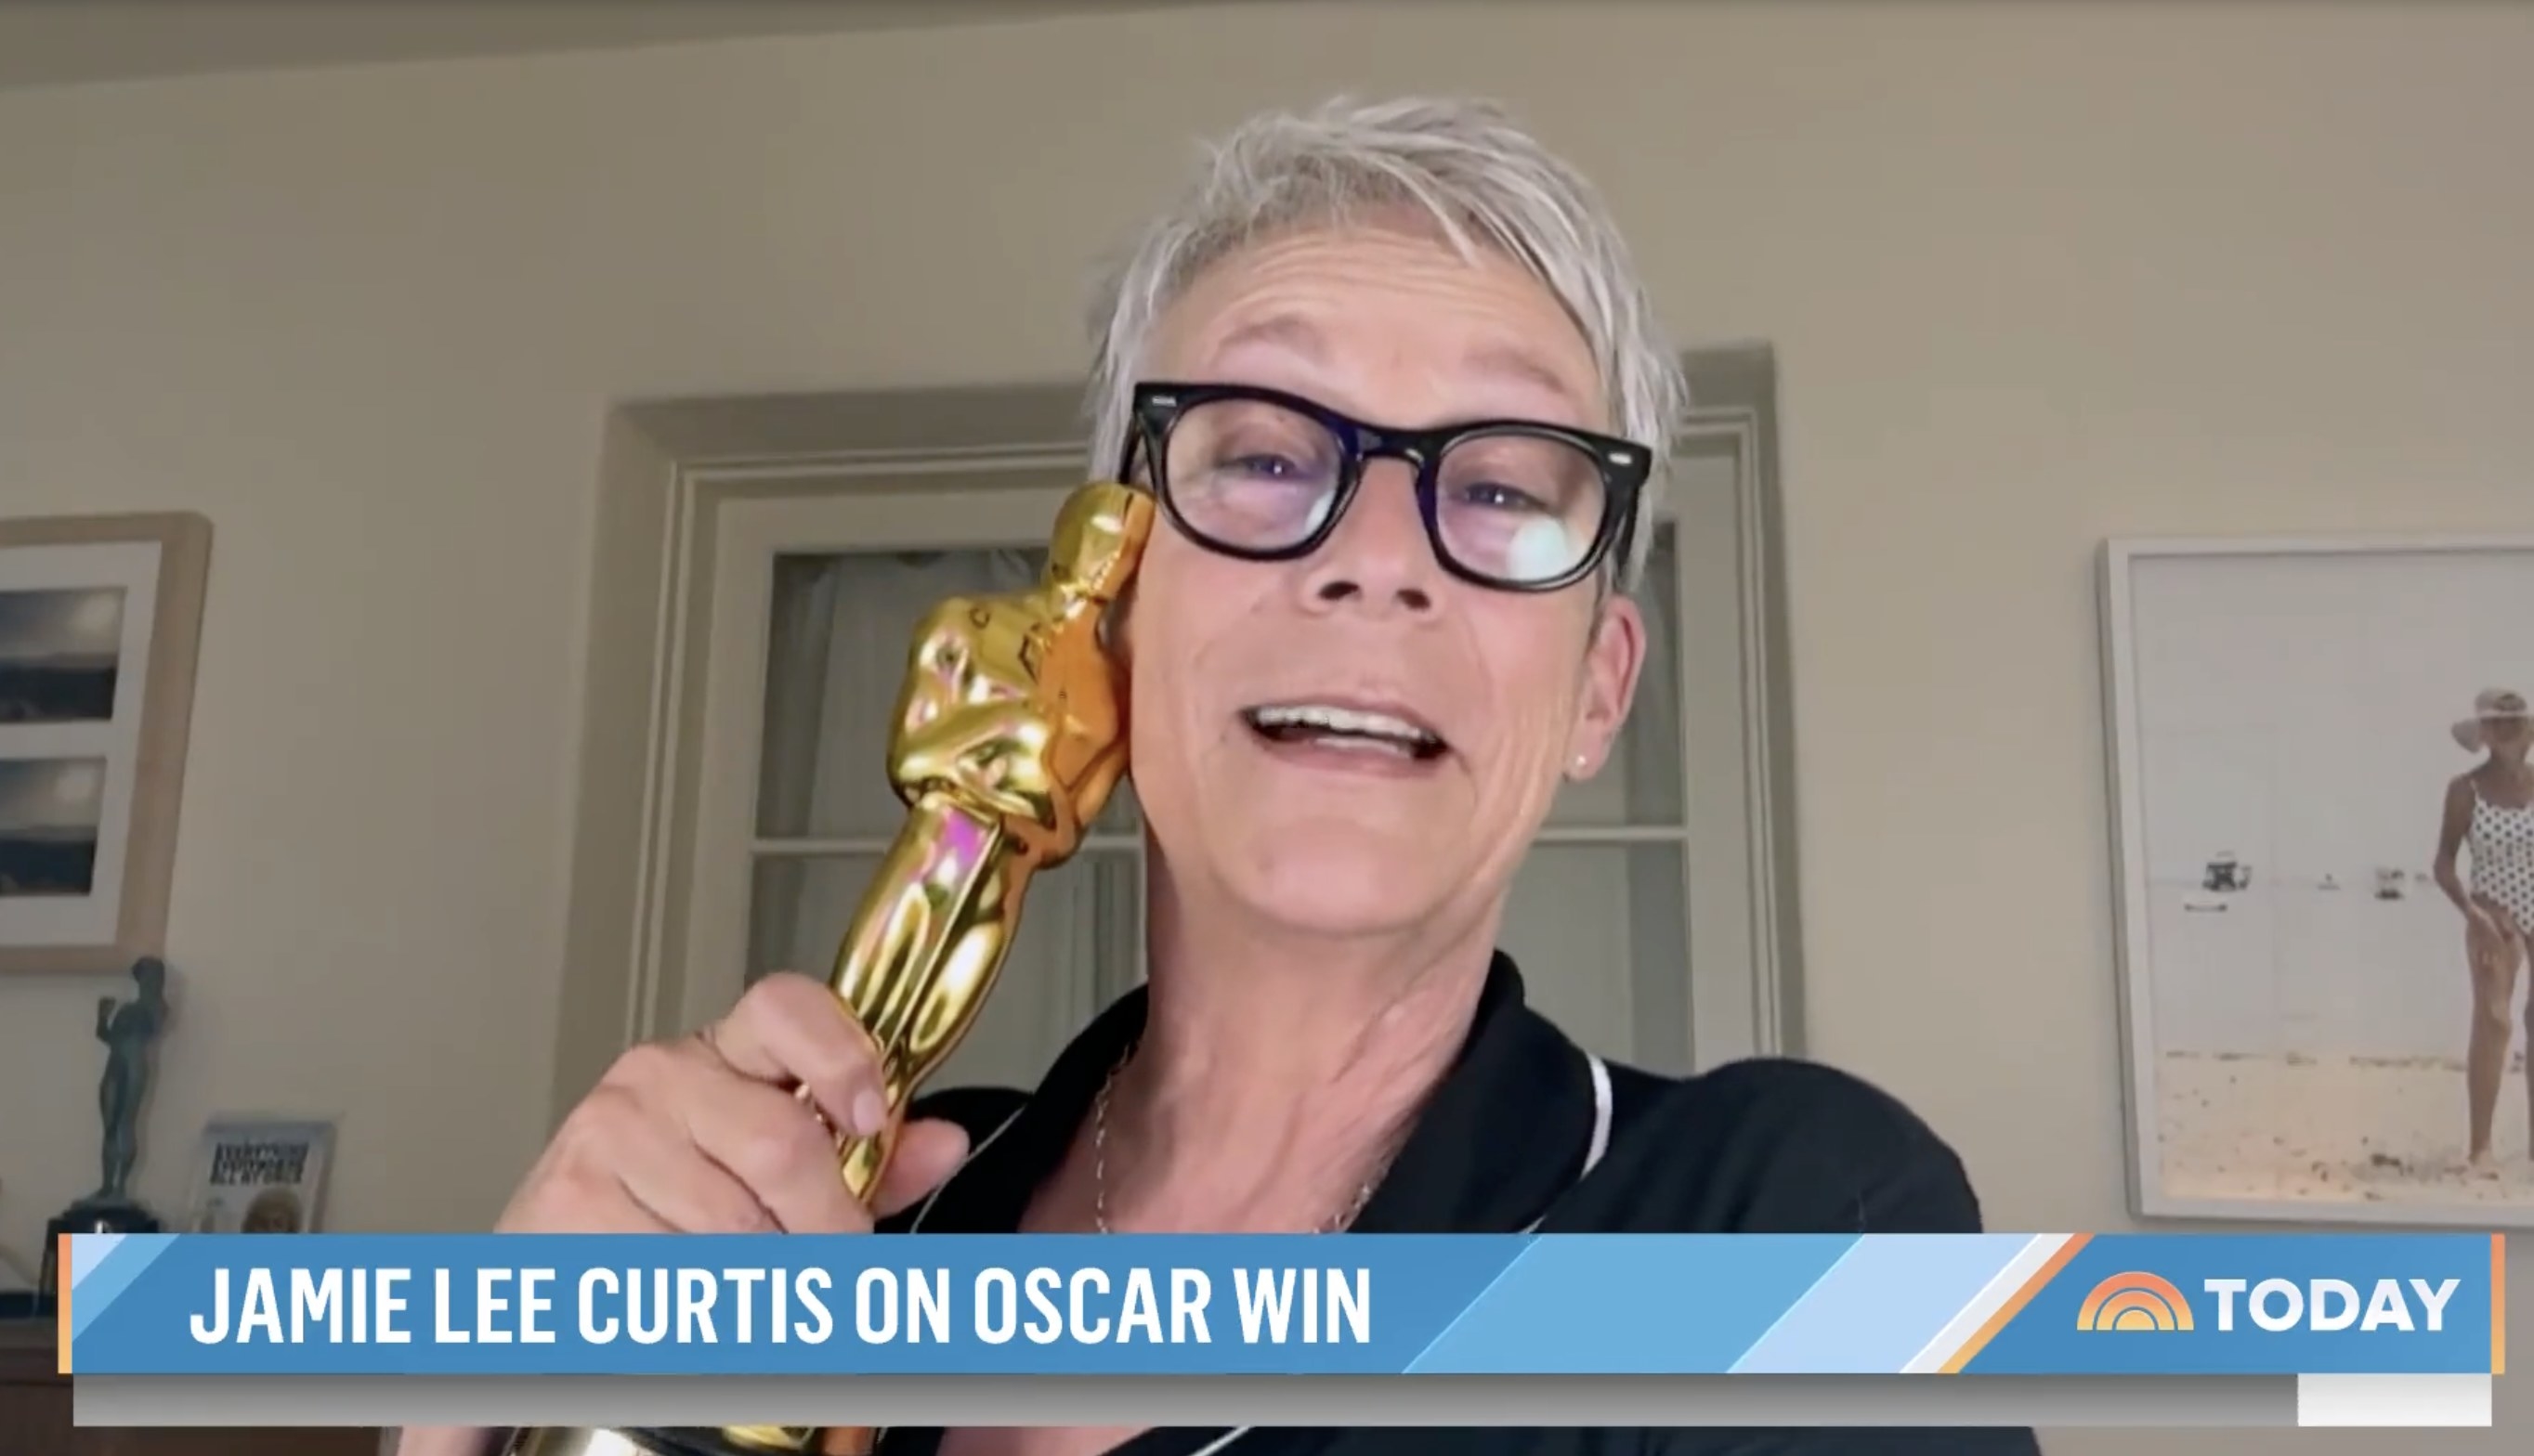 Jamie holds up her Oscar next to her face in her interview